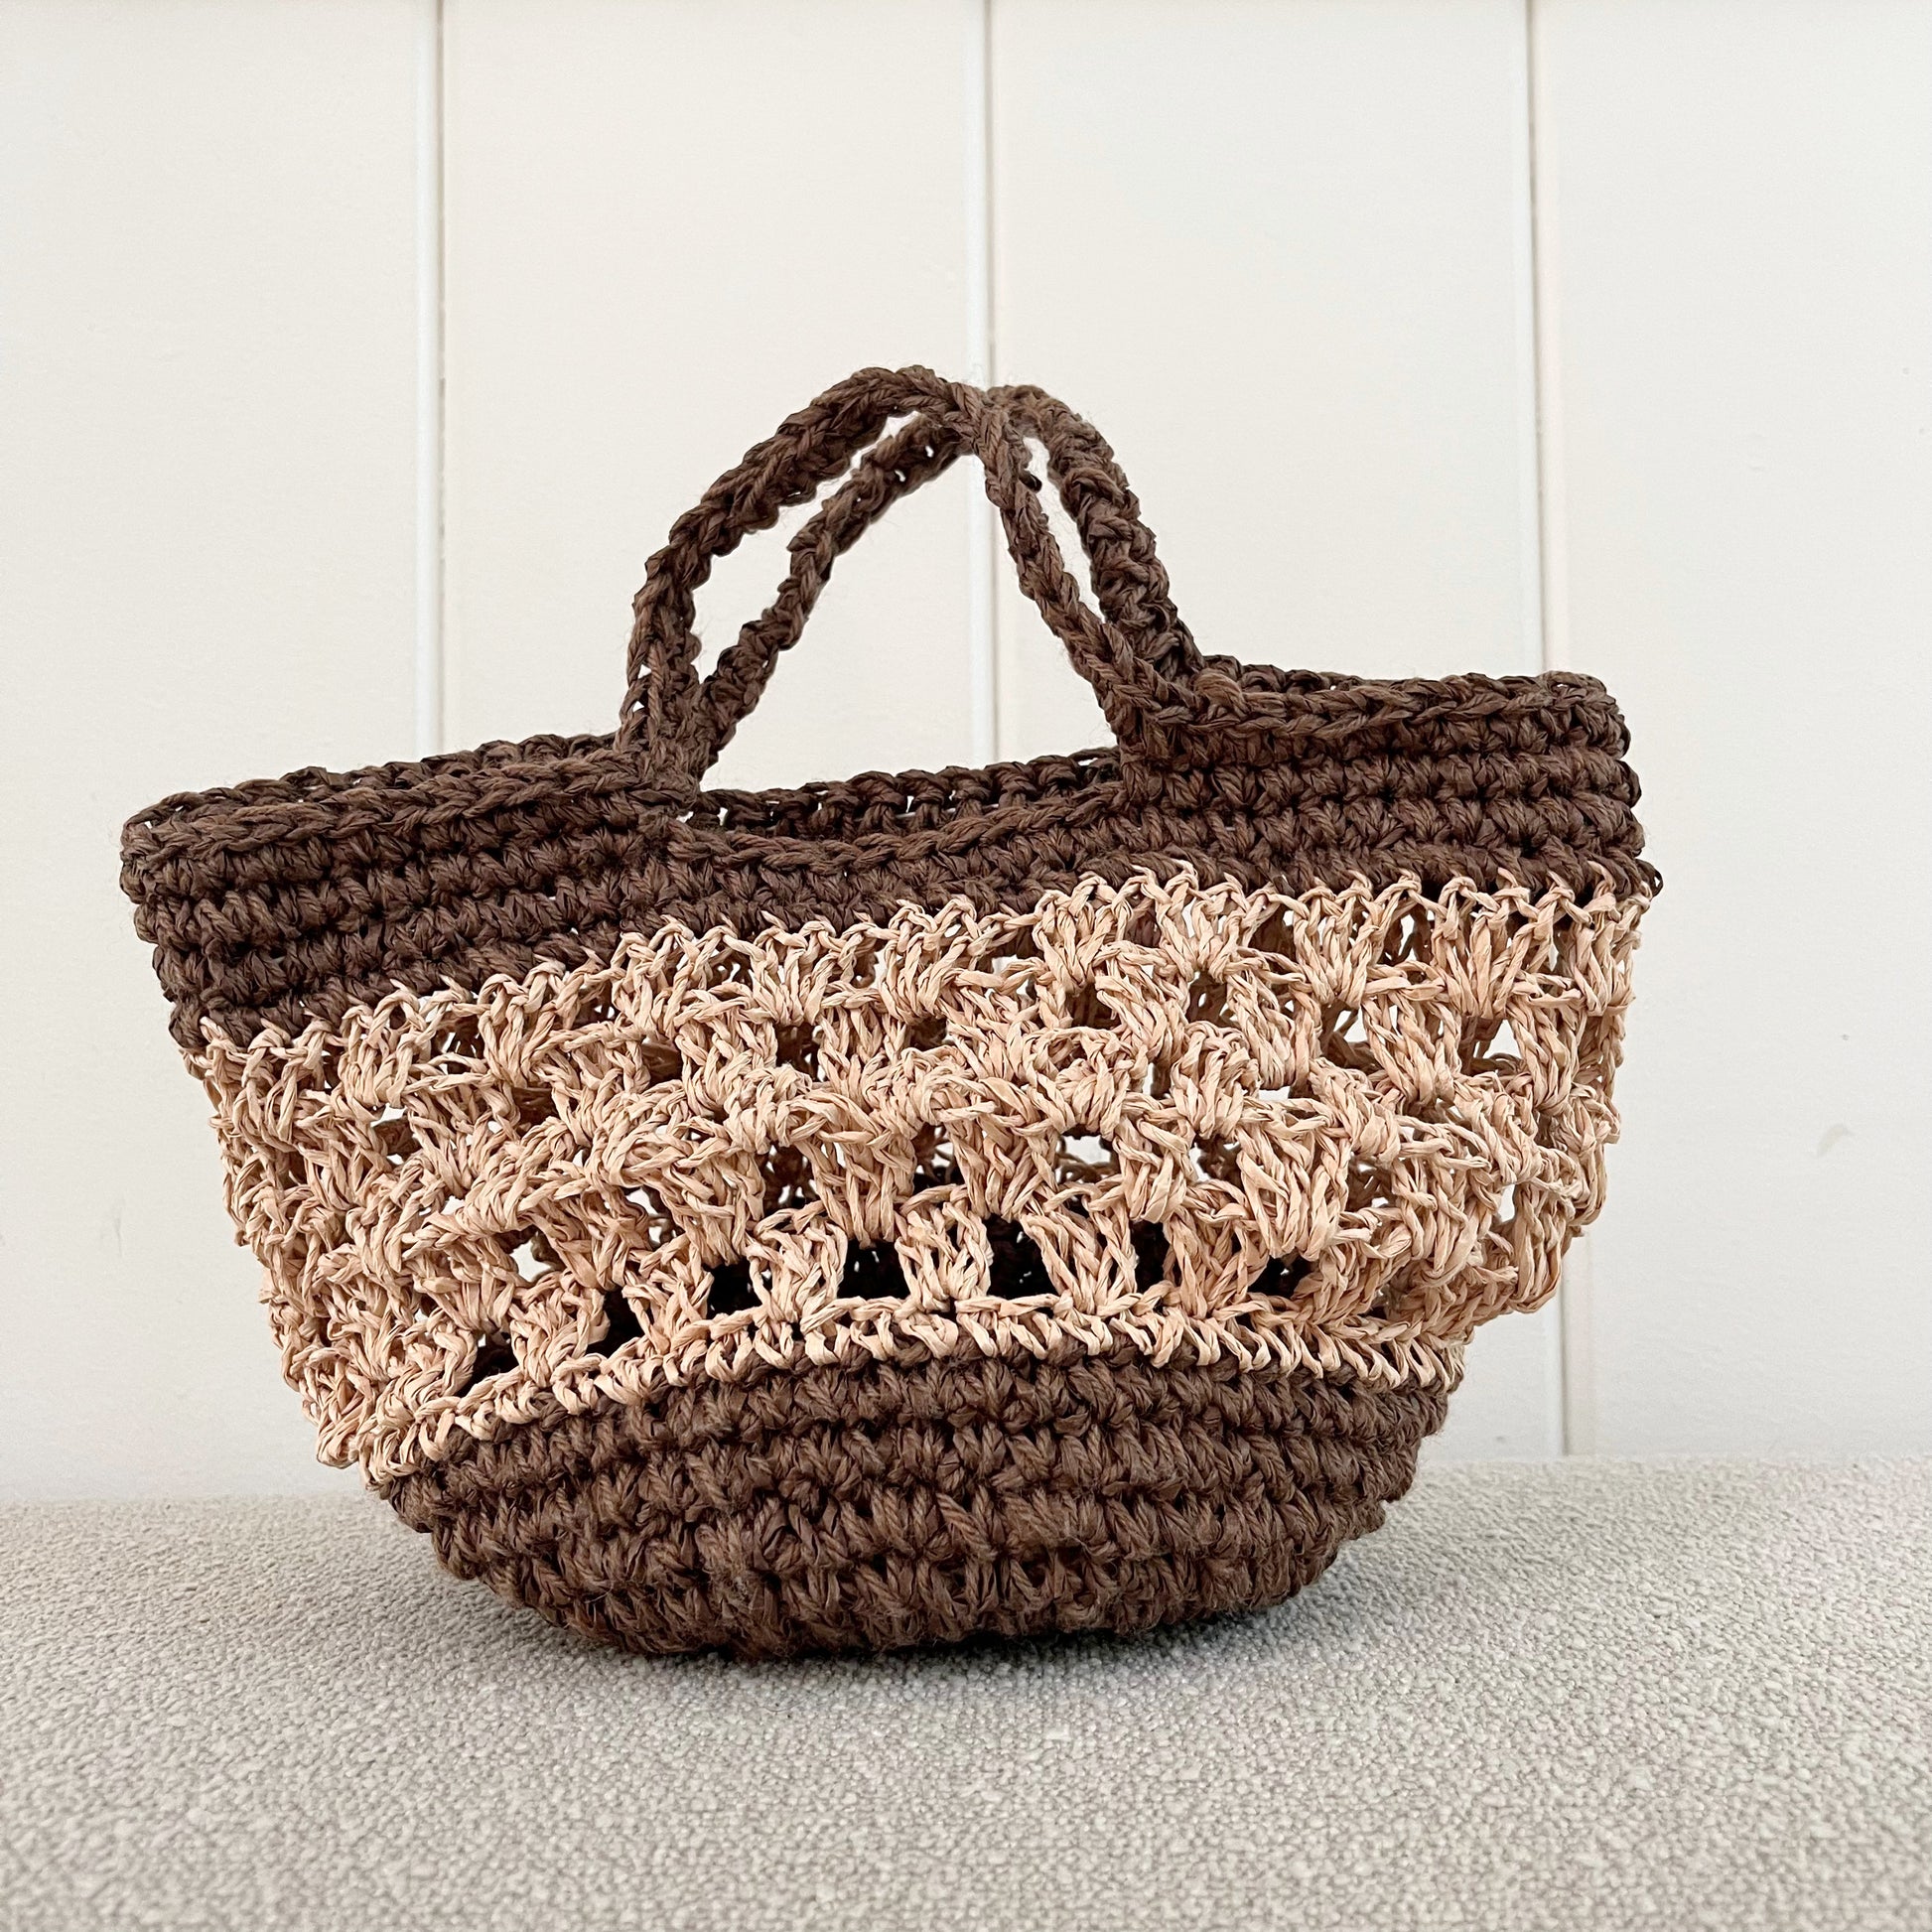 A picture of a Crochet handbag. A great addition to any neutral wardrobe.   Measures 12" wide x 8" tall + a hand strap. Made of raffia and cotton yarn. The top has hidden wire, to help keep it open when needed  